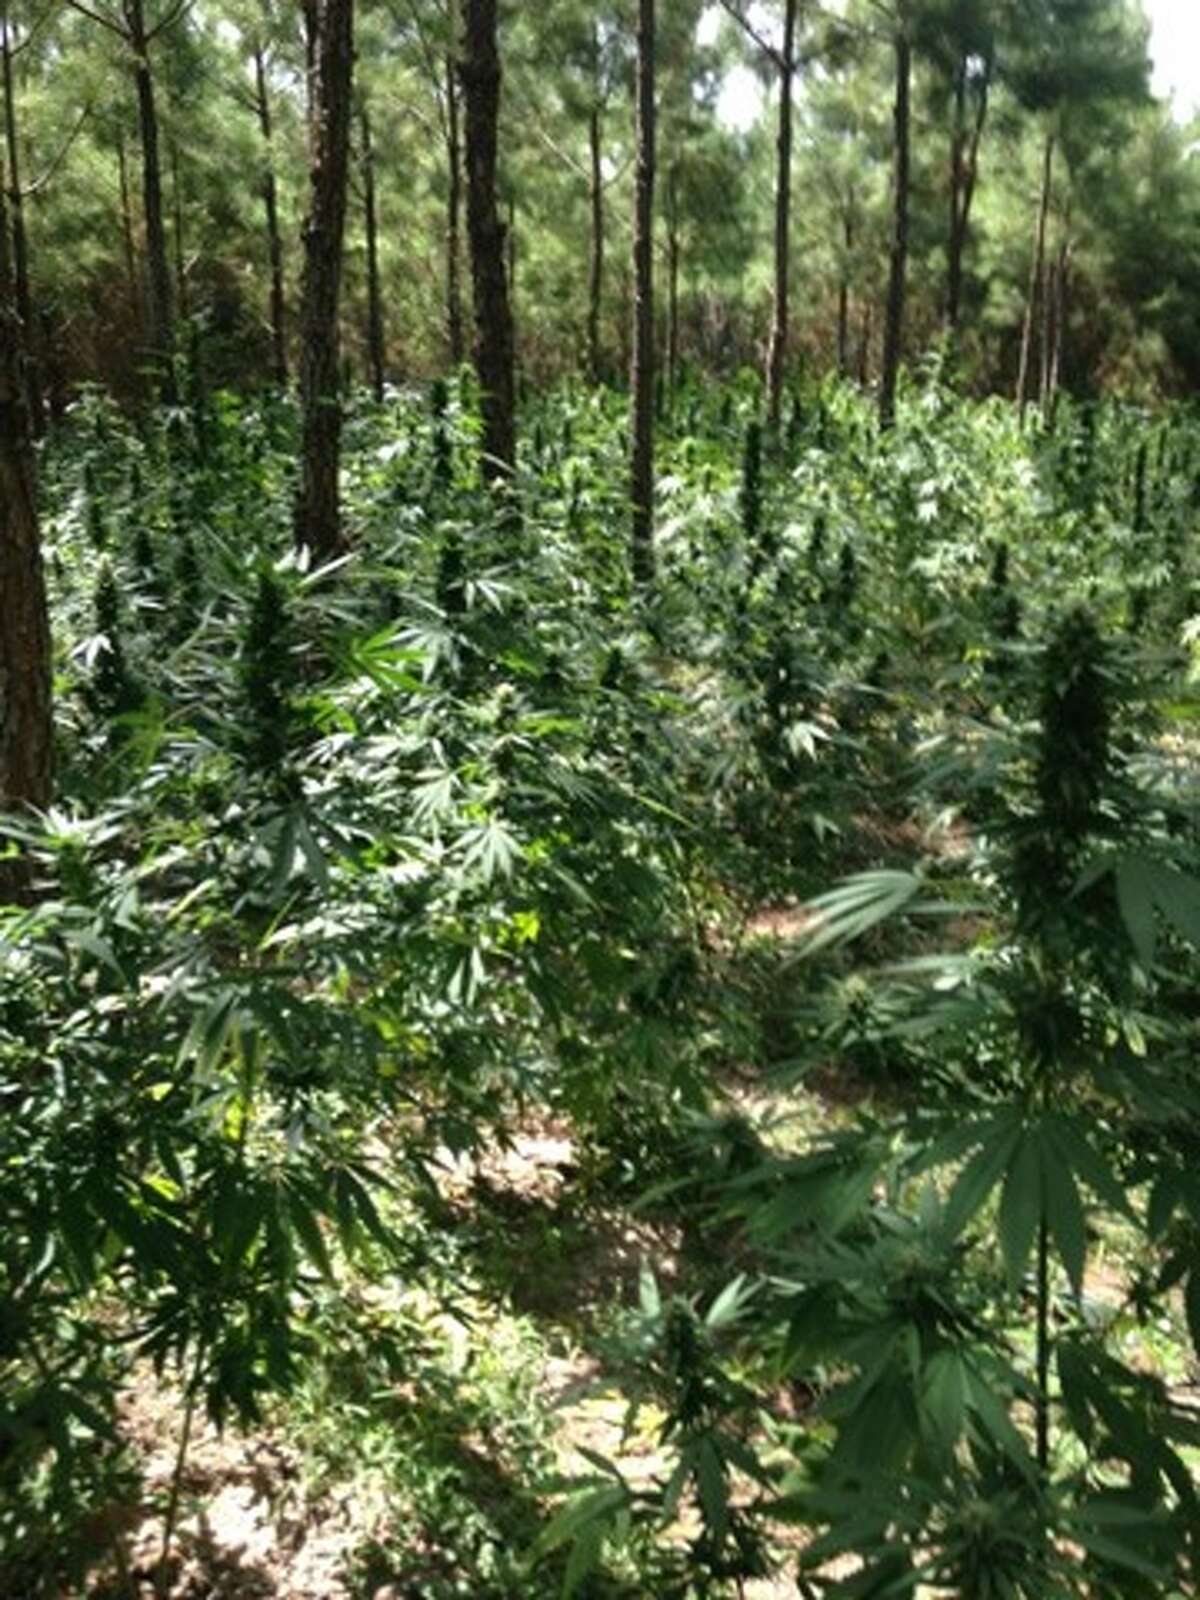 Polk County authorities uncovered another massive marijuana farm in their jurisdiction, this one containing roughly 9,600 plants, according to the Montgomery County Police Reporter.